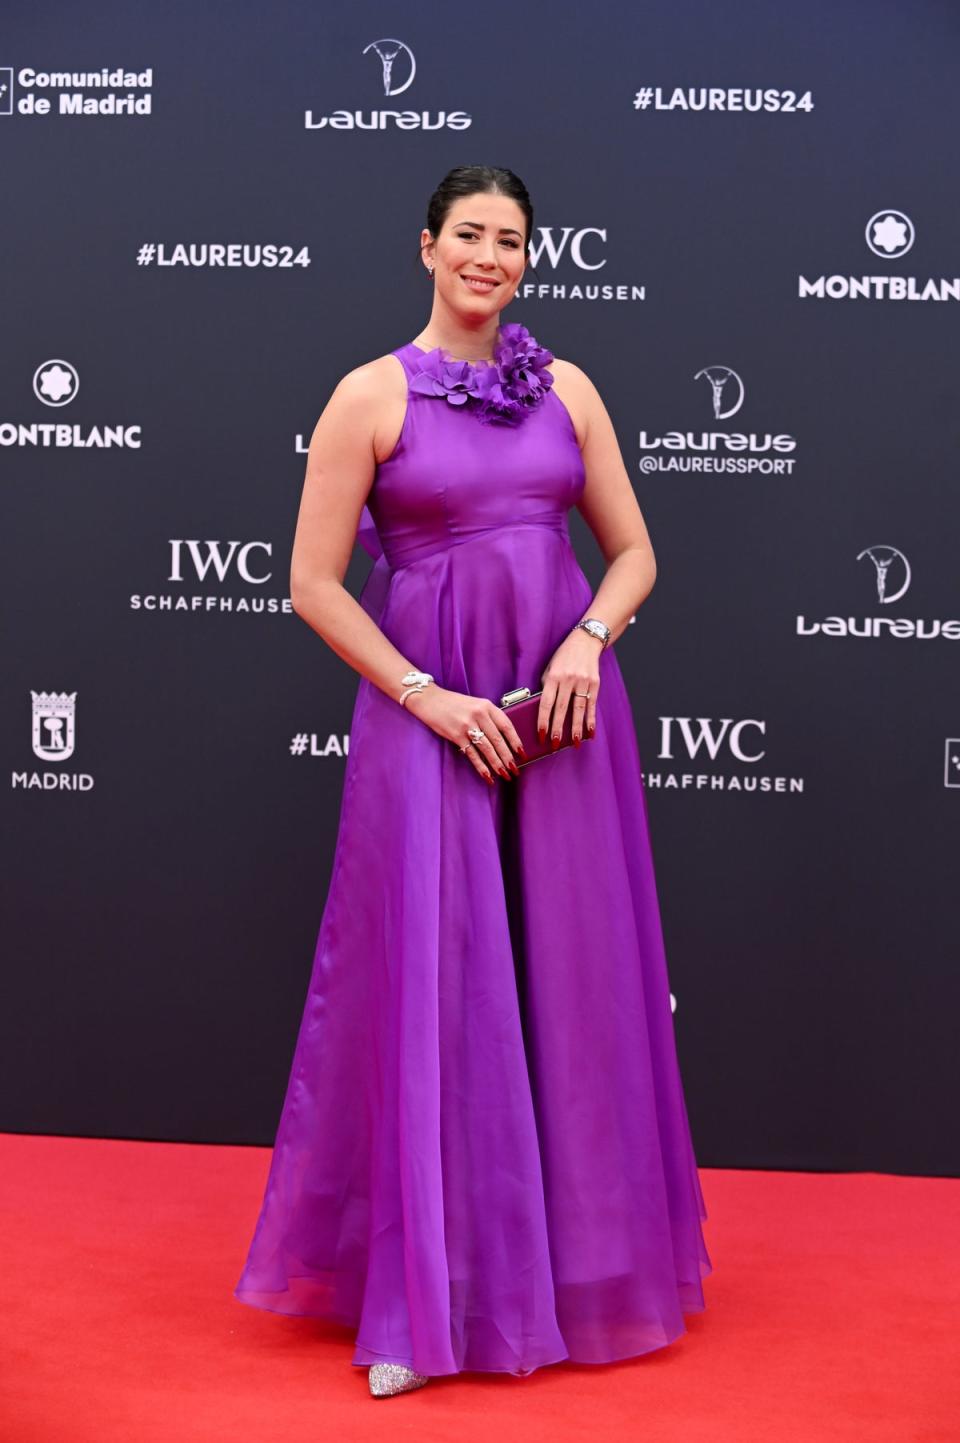 Garbine Muguruza attends the red carpet at the 2024 Laureus World Sport Awards in Madrid (Getty Images)